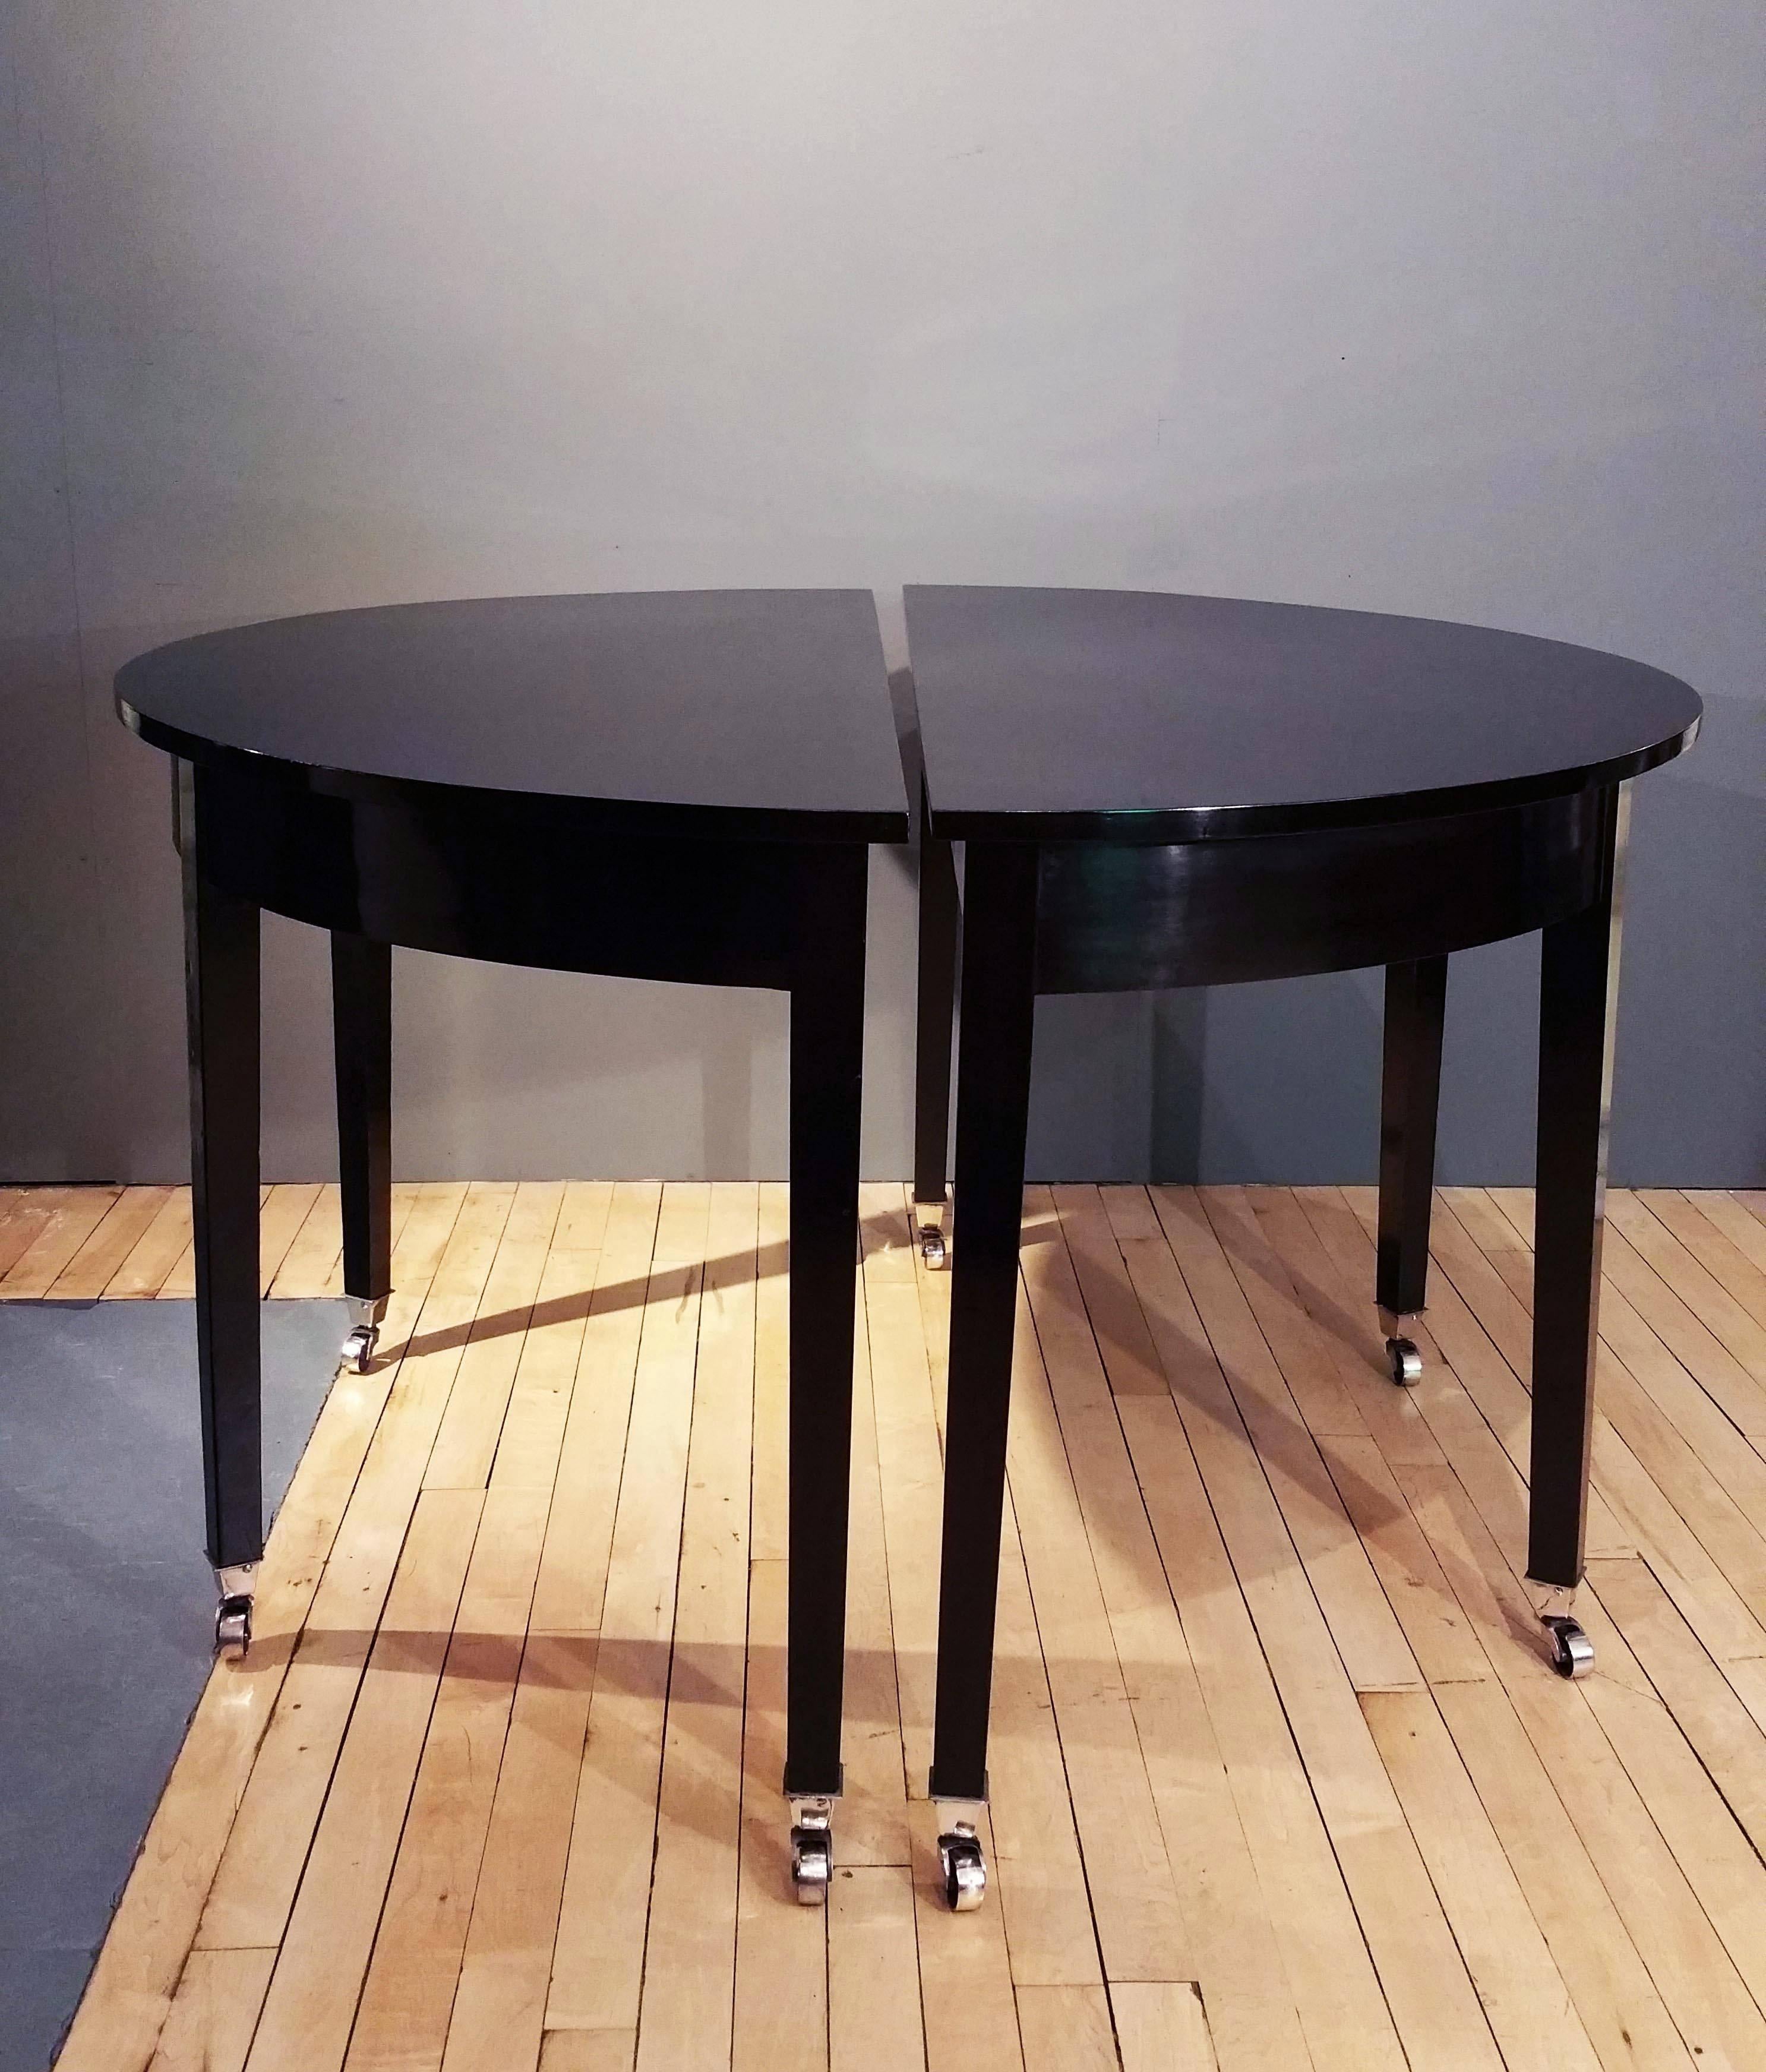 This beautiful pair of early 19th century demilune console tables features a well-proportioned size to work in a variety of home settings. The mahogany tables have been refinished in a sleek and high gloss black lacquer finish and are supported on